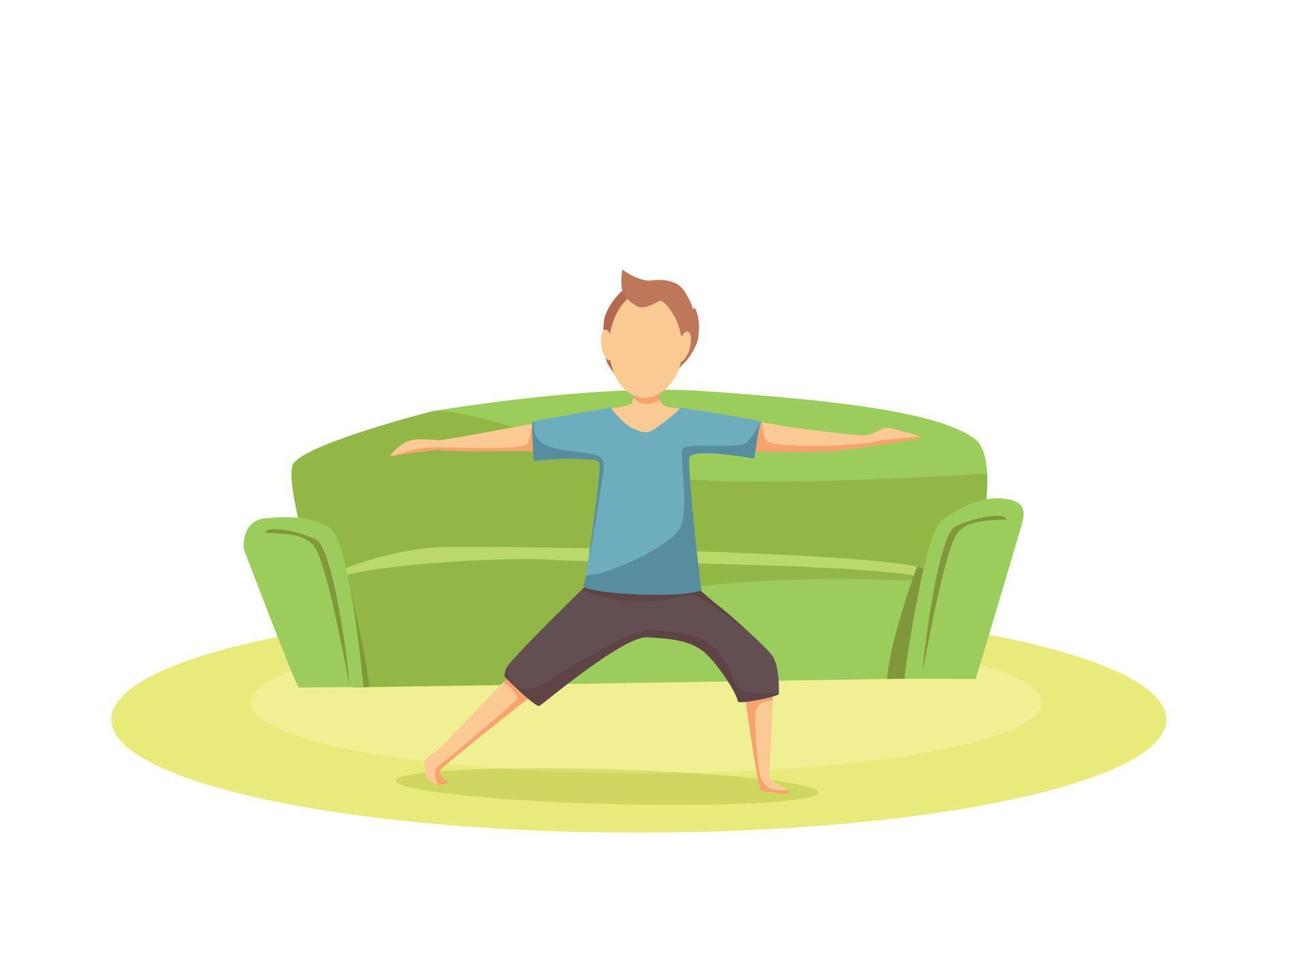 Happy healthy young man practices yoga in the living room. Vector cartoon illustration. Sports activity, workout, exercise, fitness, indoors, meditation, lifestyle, stay at home concept.